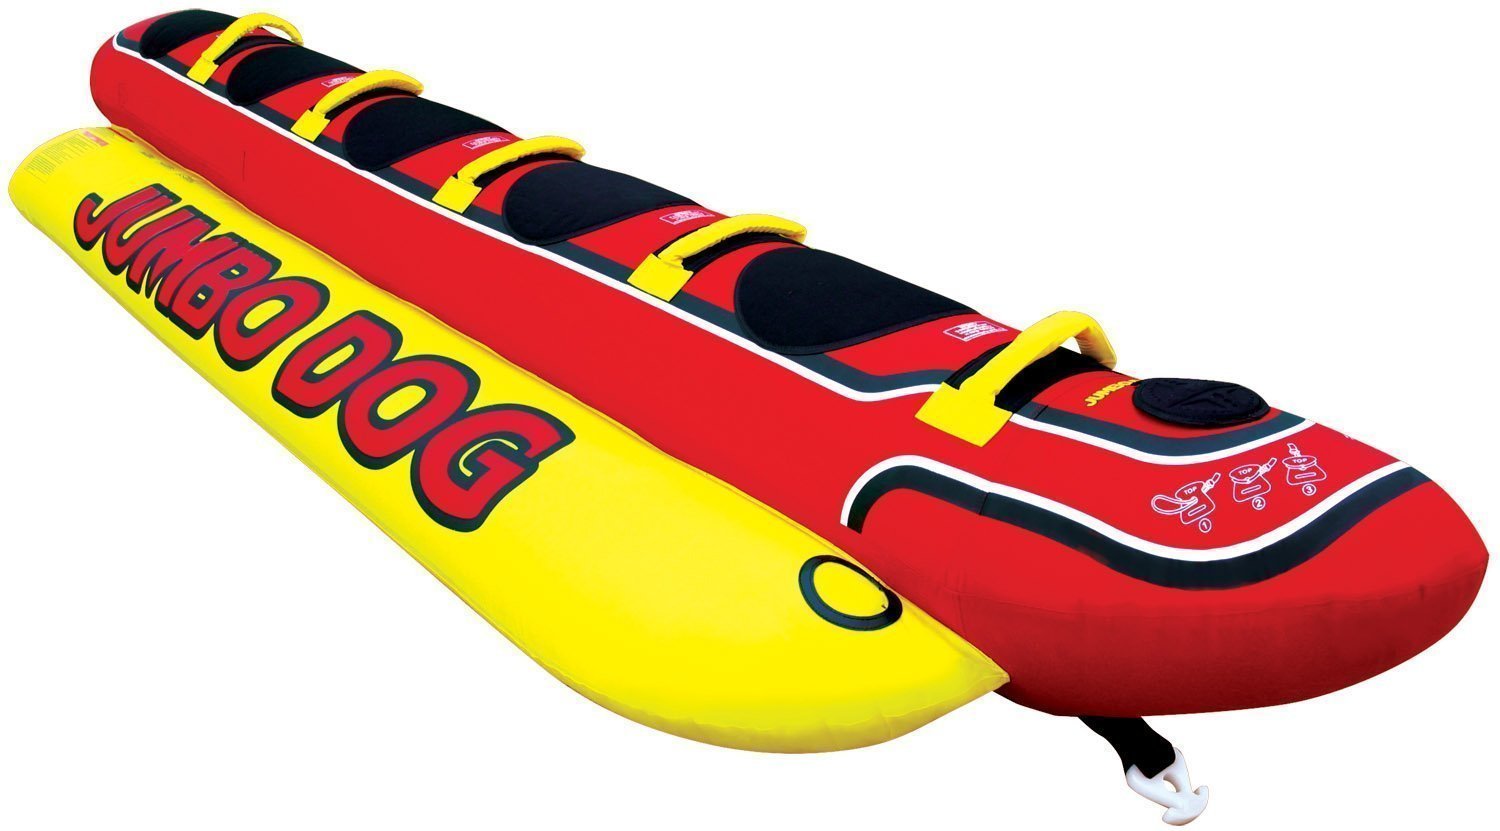 Aufblasbare Ringe / Bananen / Boote Airhead Towable Hot Dog 3 Persons red/yellow